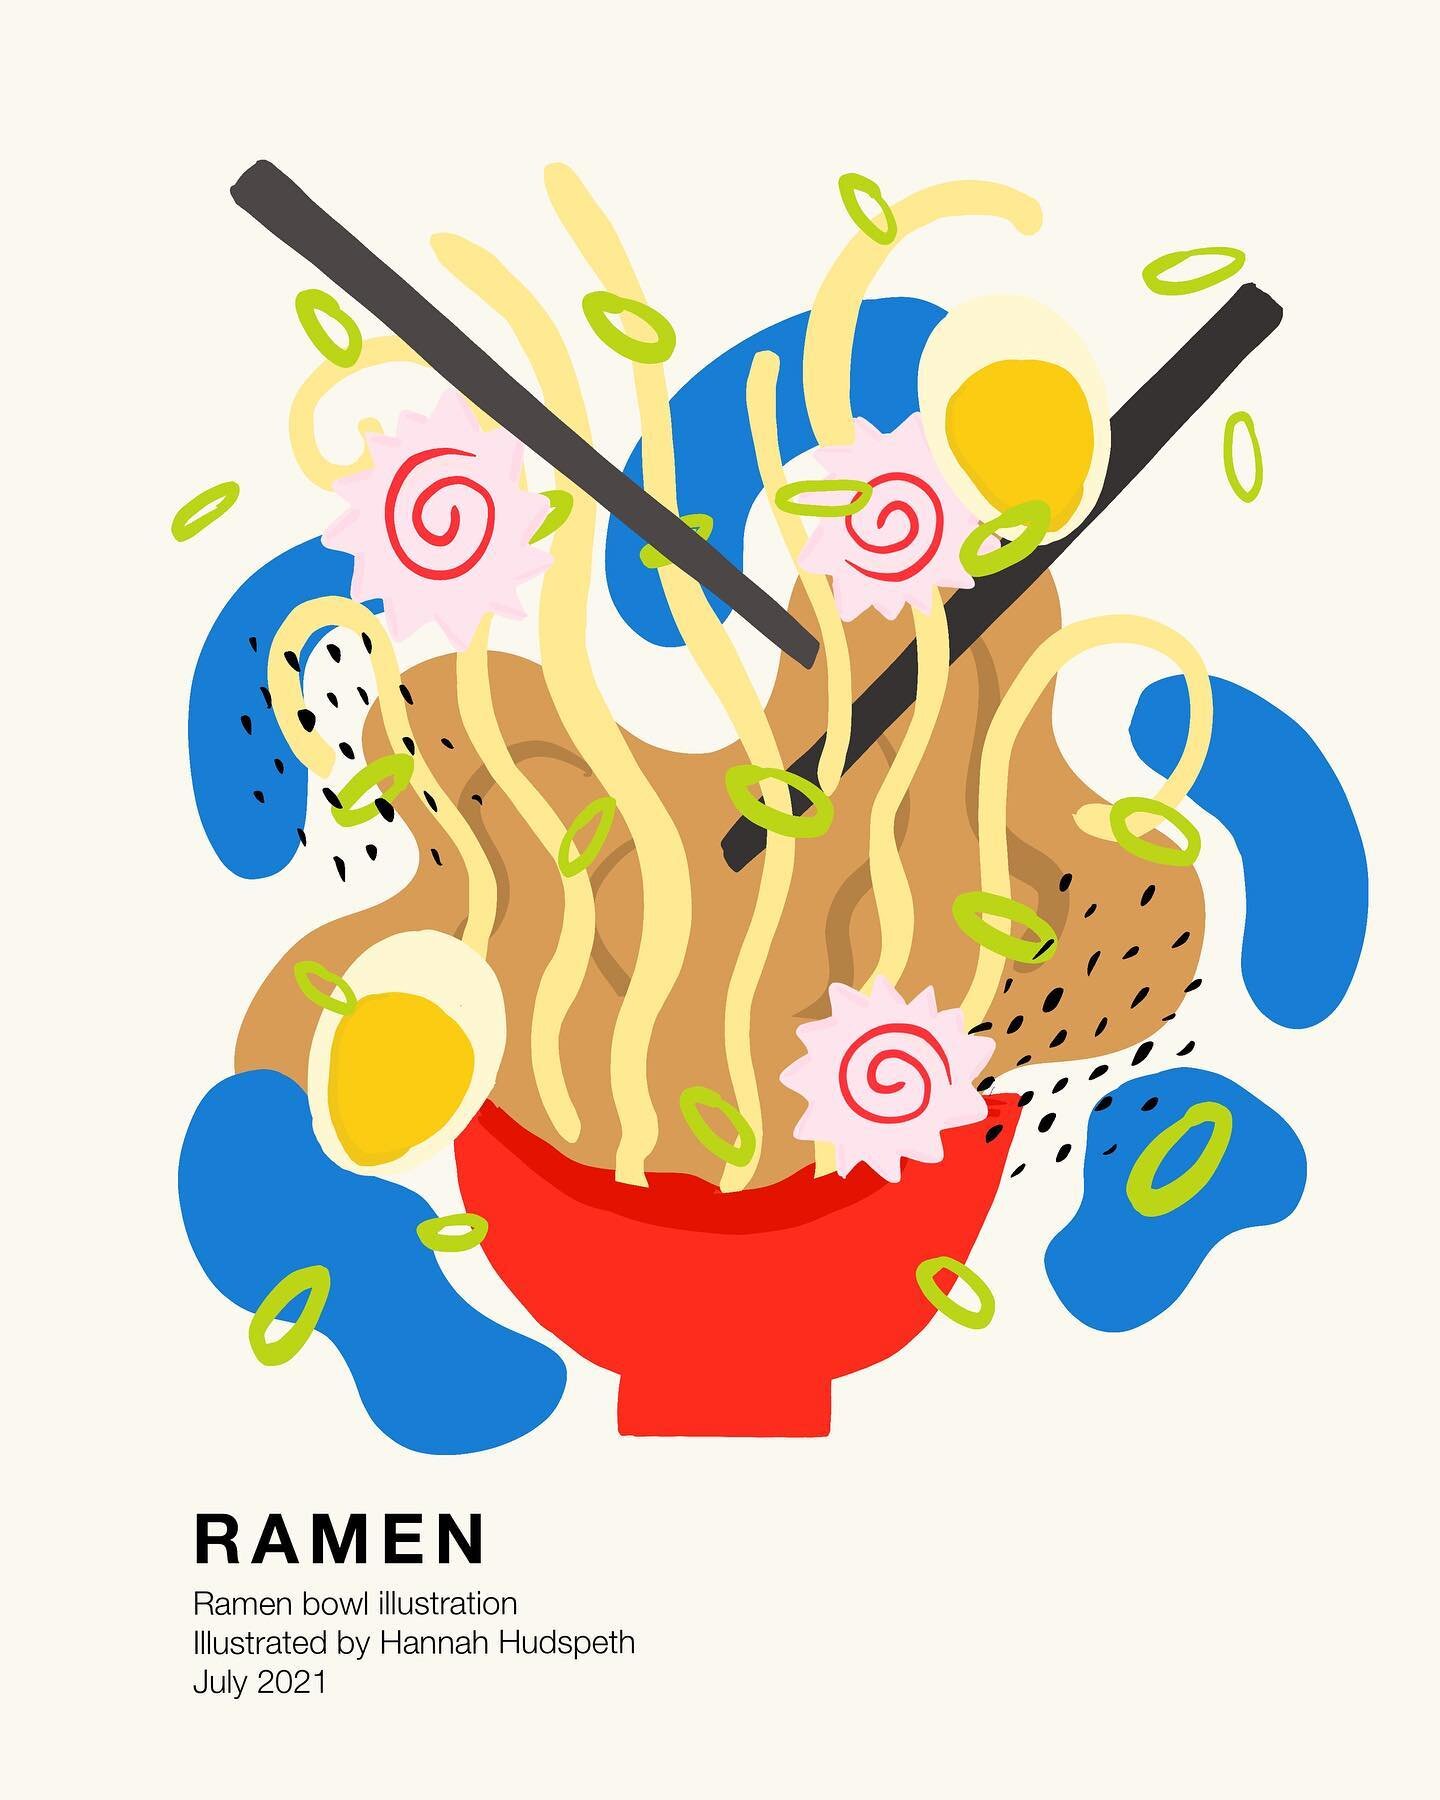 I&rsquo;m really like this poster design layout and have been experimenting with different illustrations. This one has to be my favorite so far. Ramen poster is now available on my website! 🍜